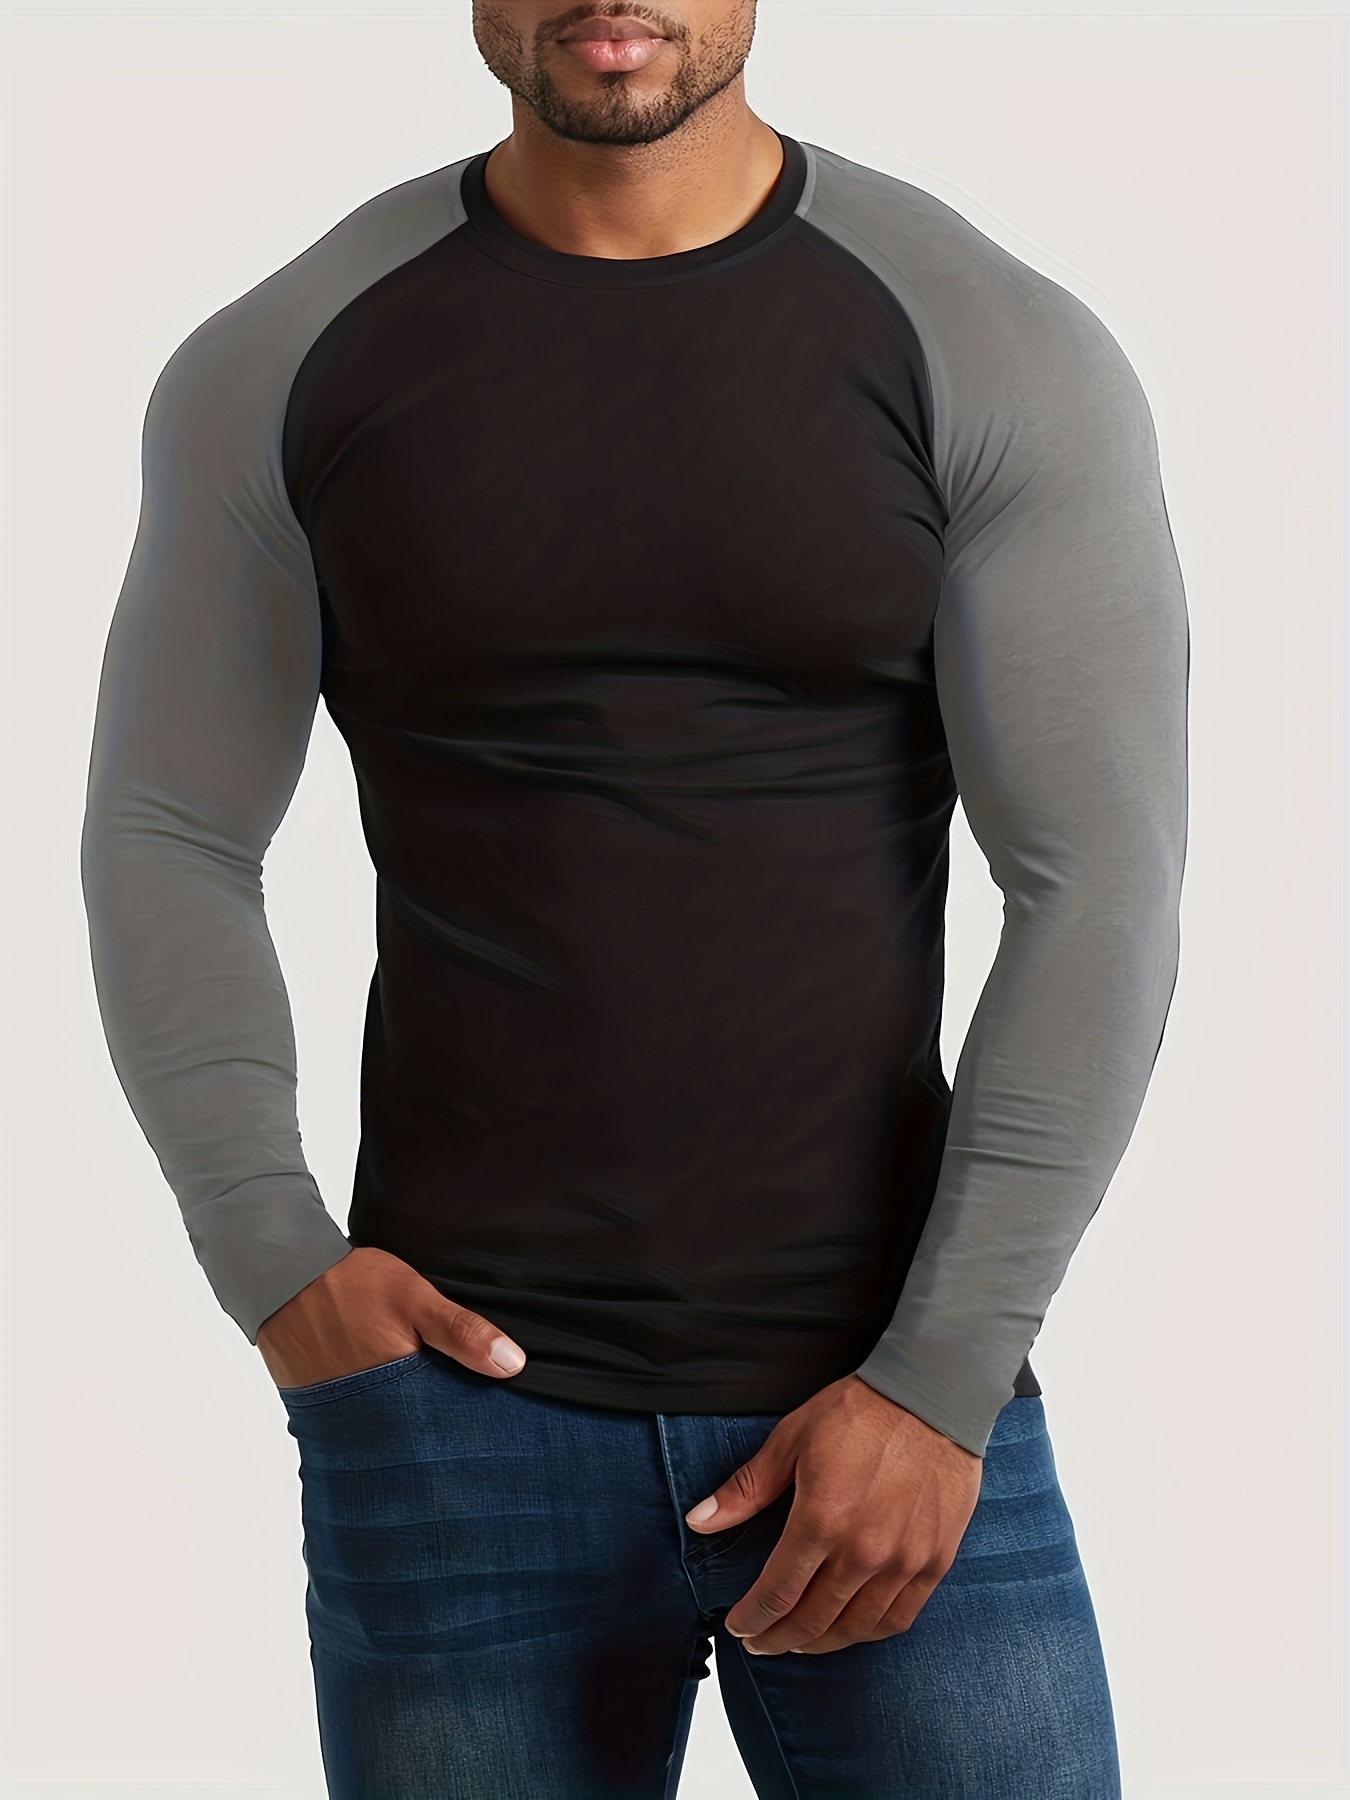 Men's Sports Compression Shirt Running Workout Long Sleeve Quick Dry Base  Layer Active Athletic T-Shirt Gym Tops